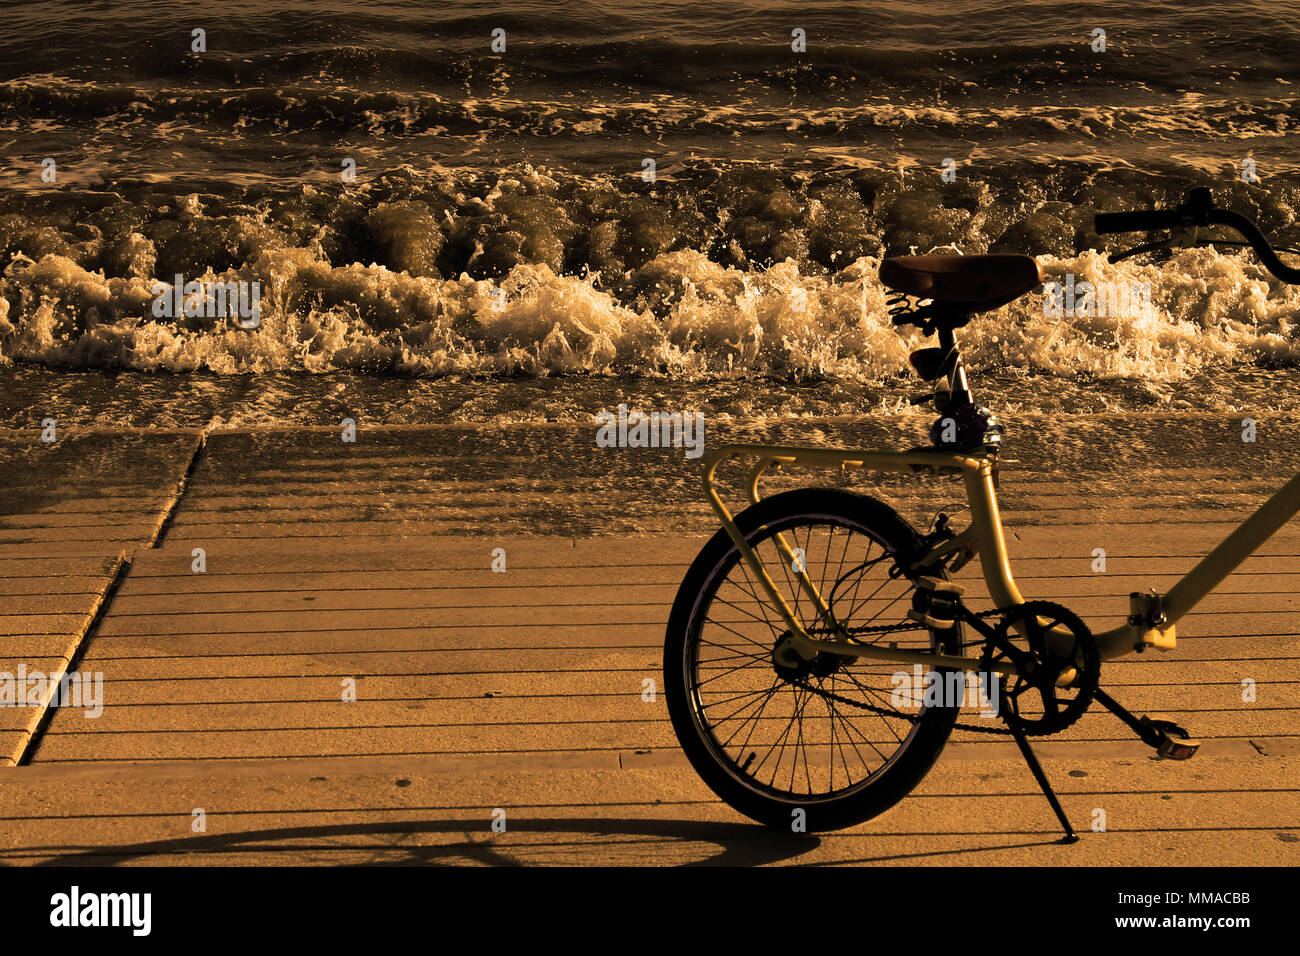 bicycle on the seashore in sepia style Stock Photo